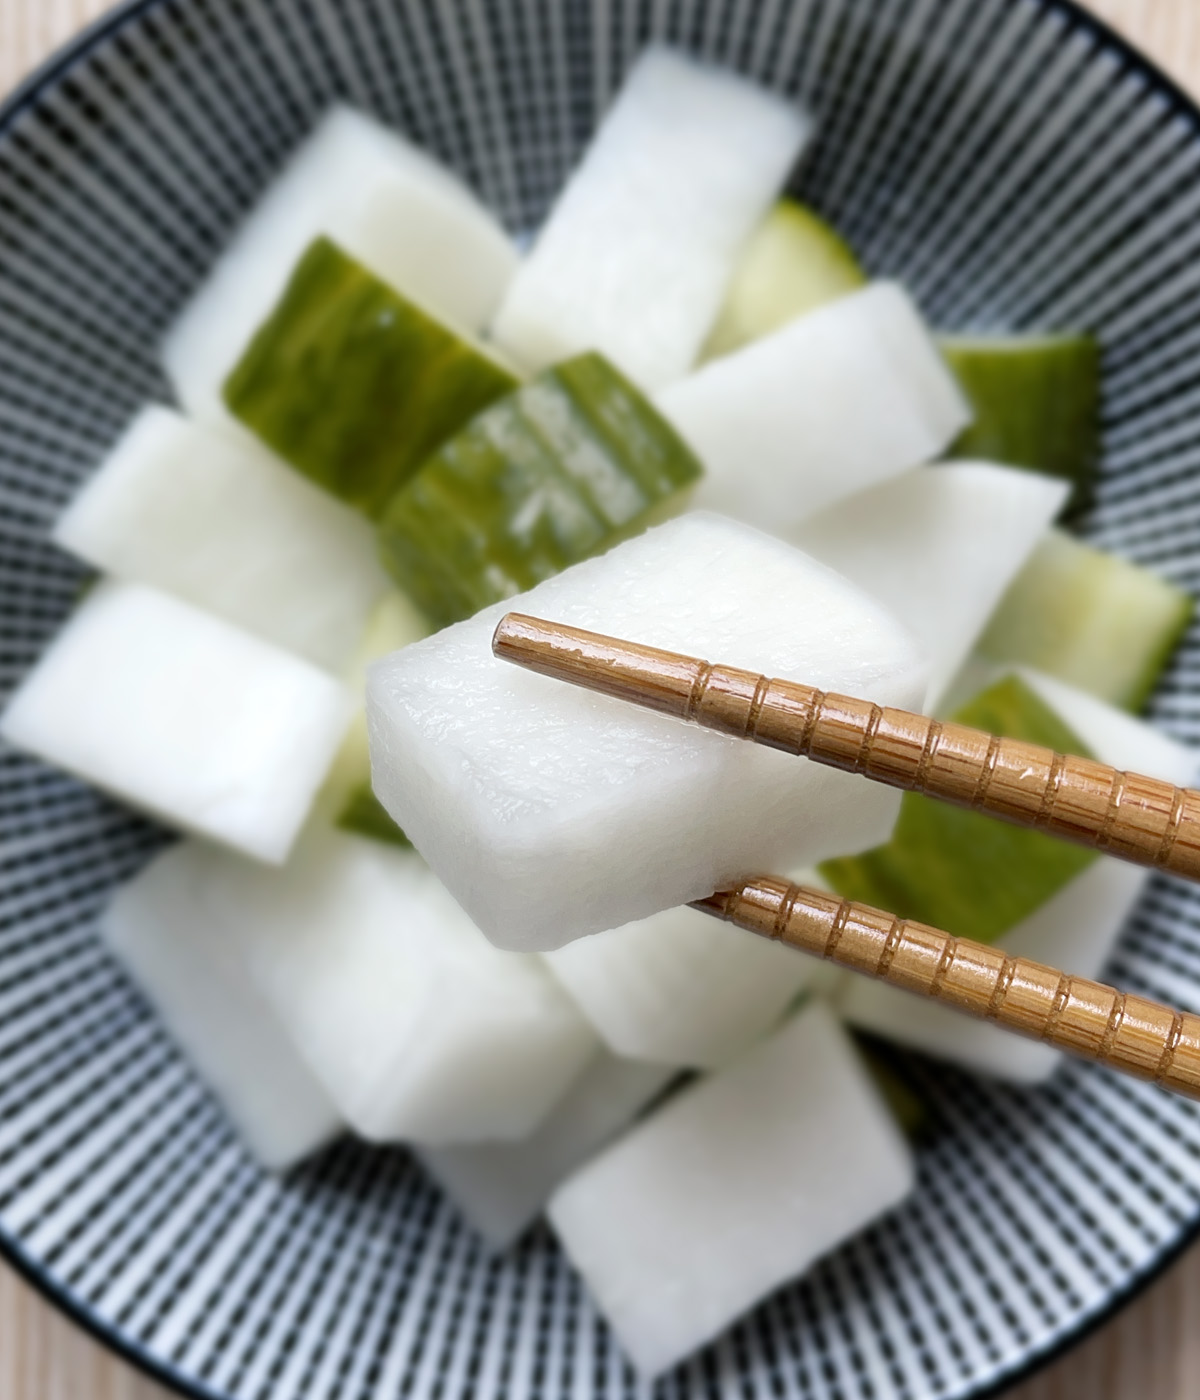 Close-up of a pair of wooden chopsticks holding a chunk of white radish.